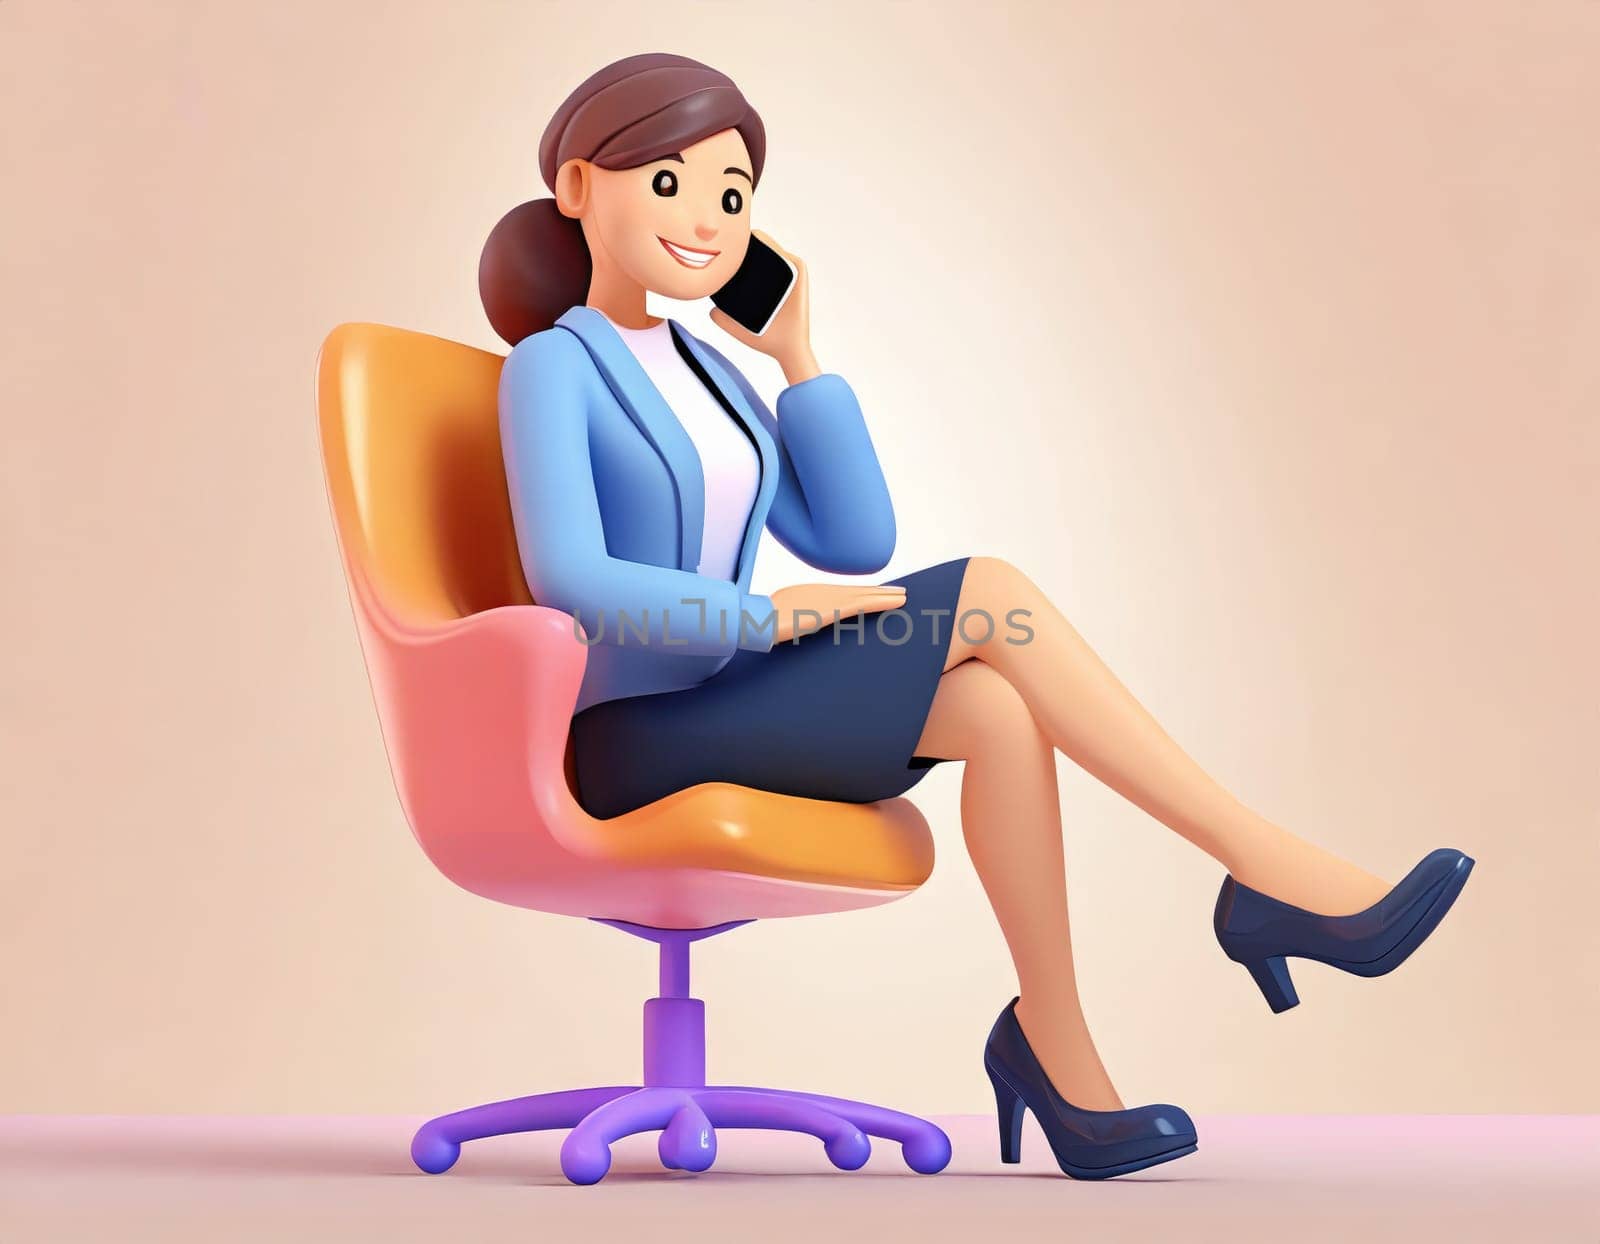 3D Character Office worker on telephone conversation, sitting in a portable chair